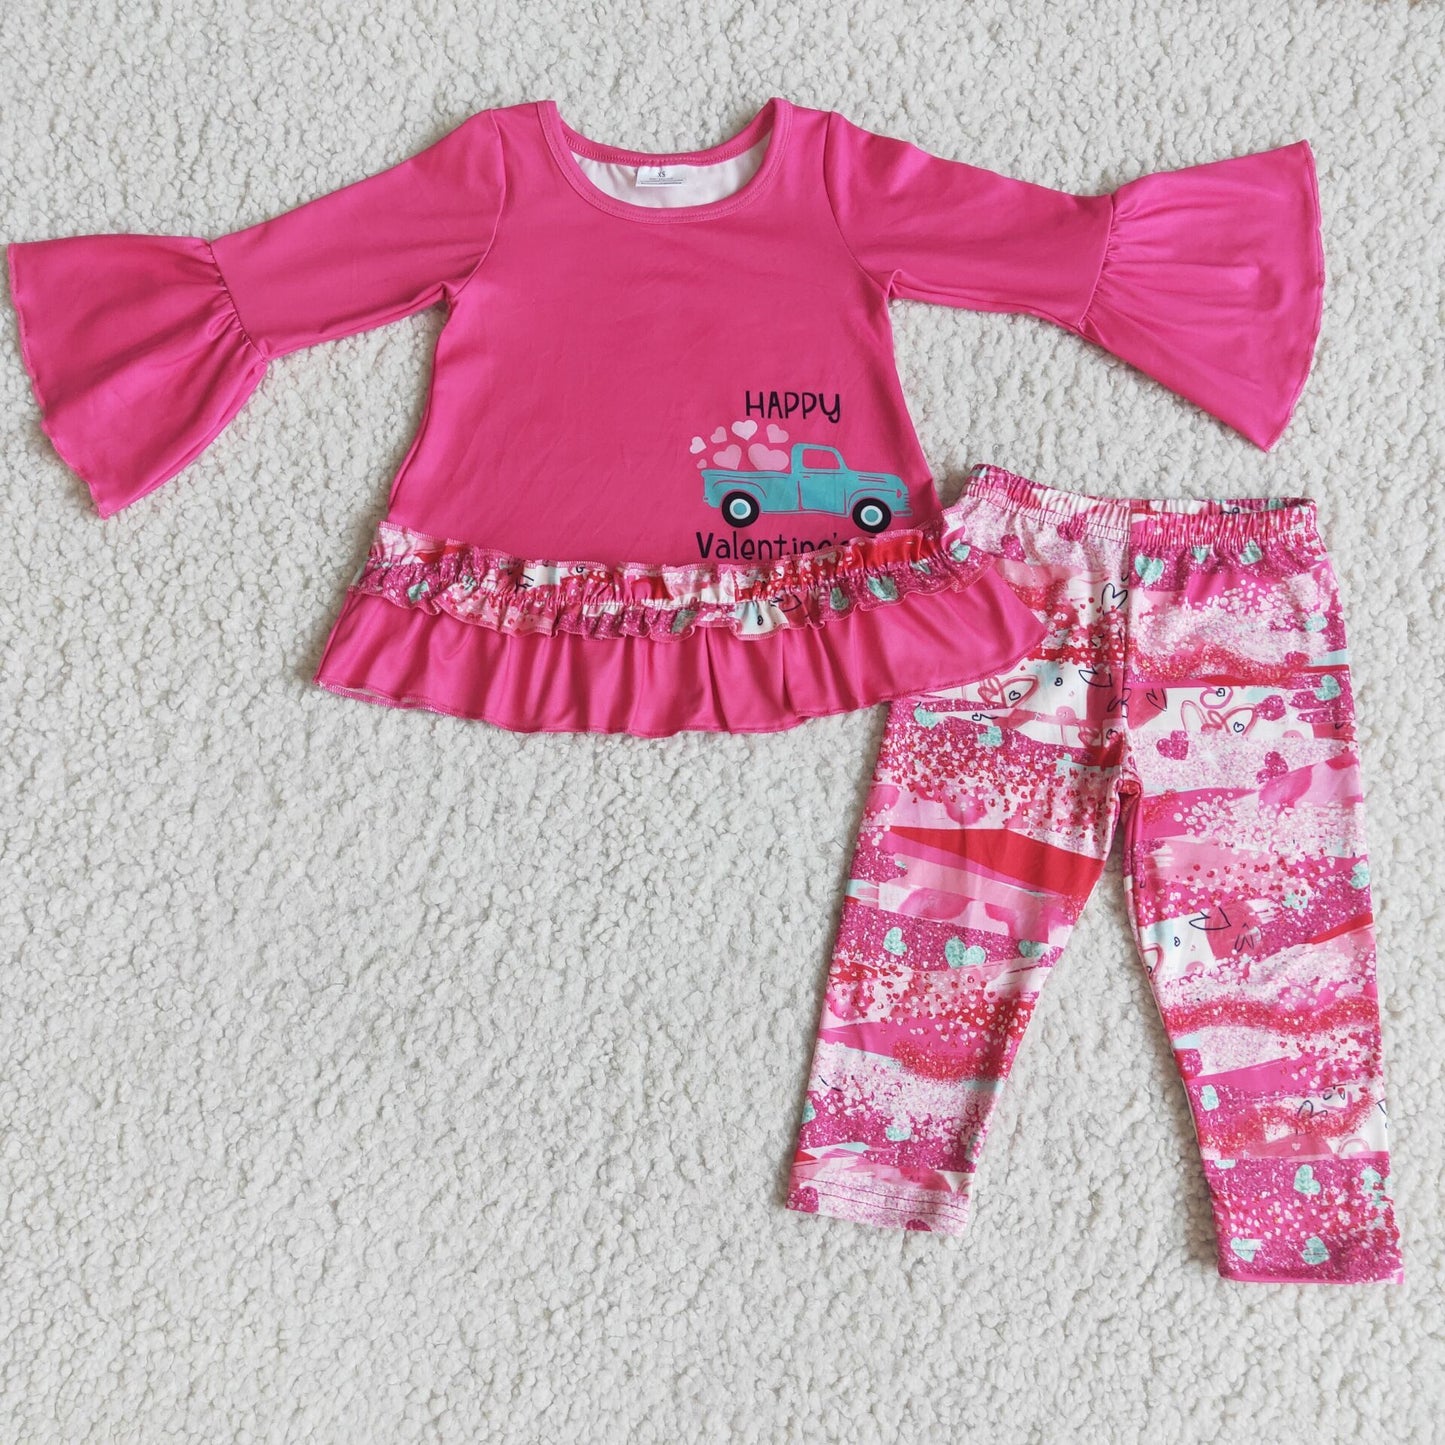 valentine's day outfit hotpink leggings set